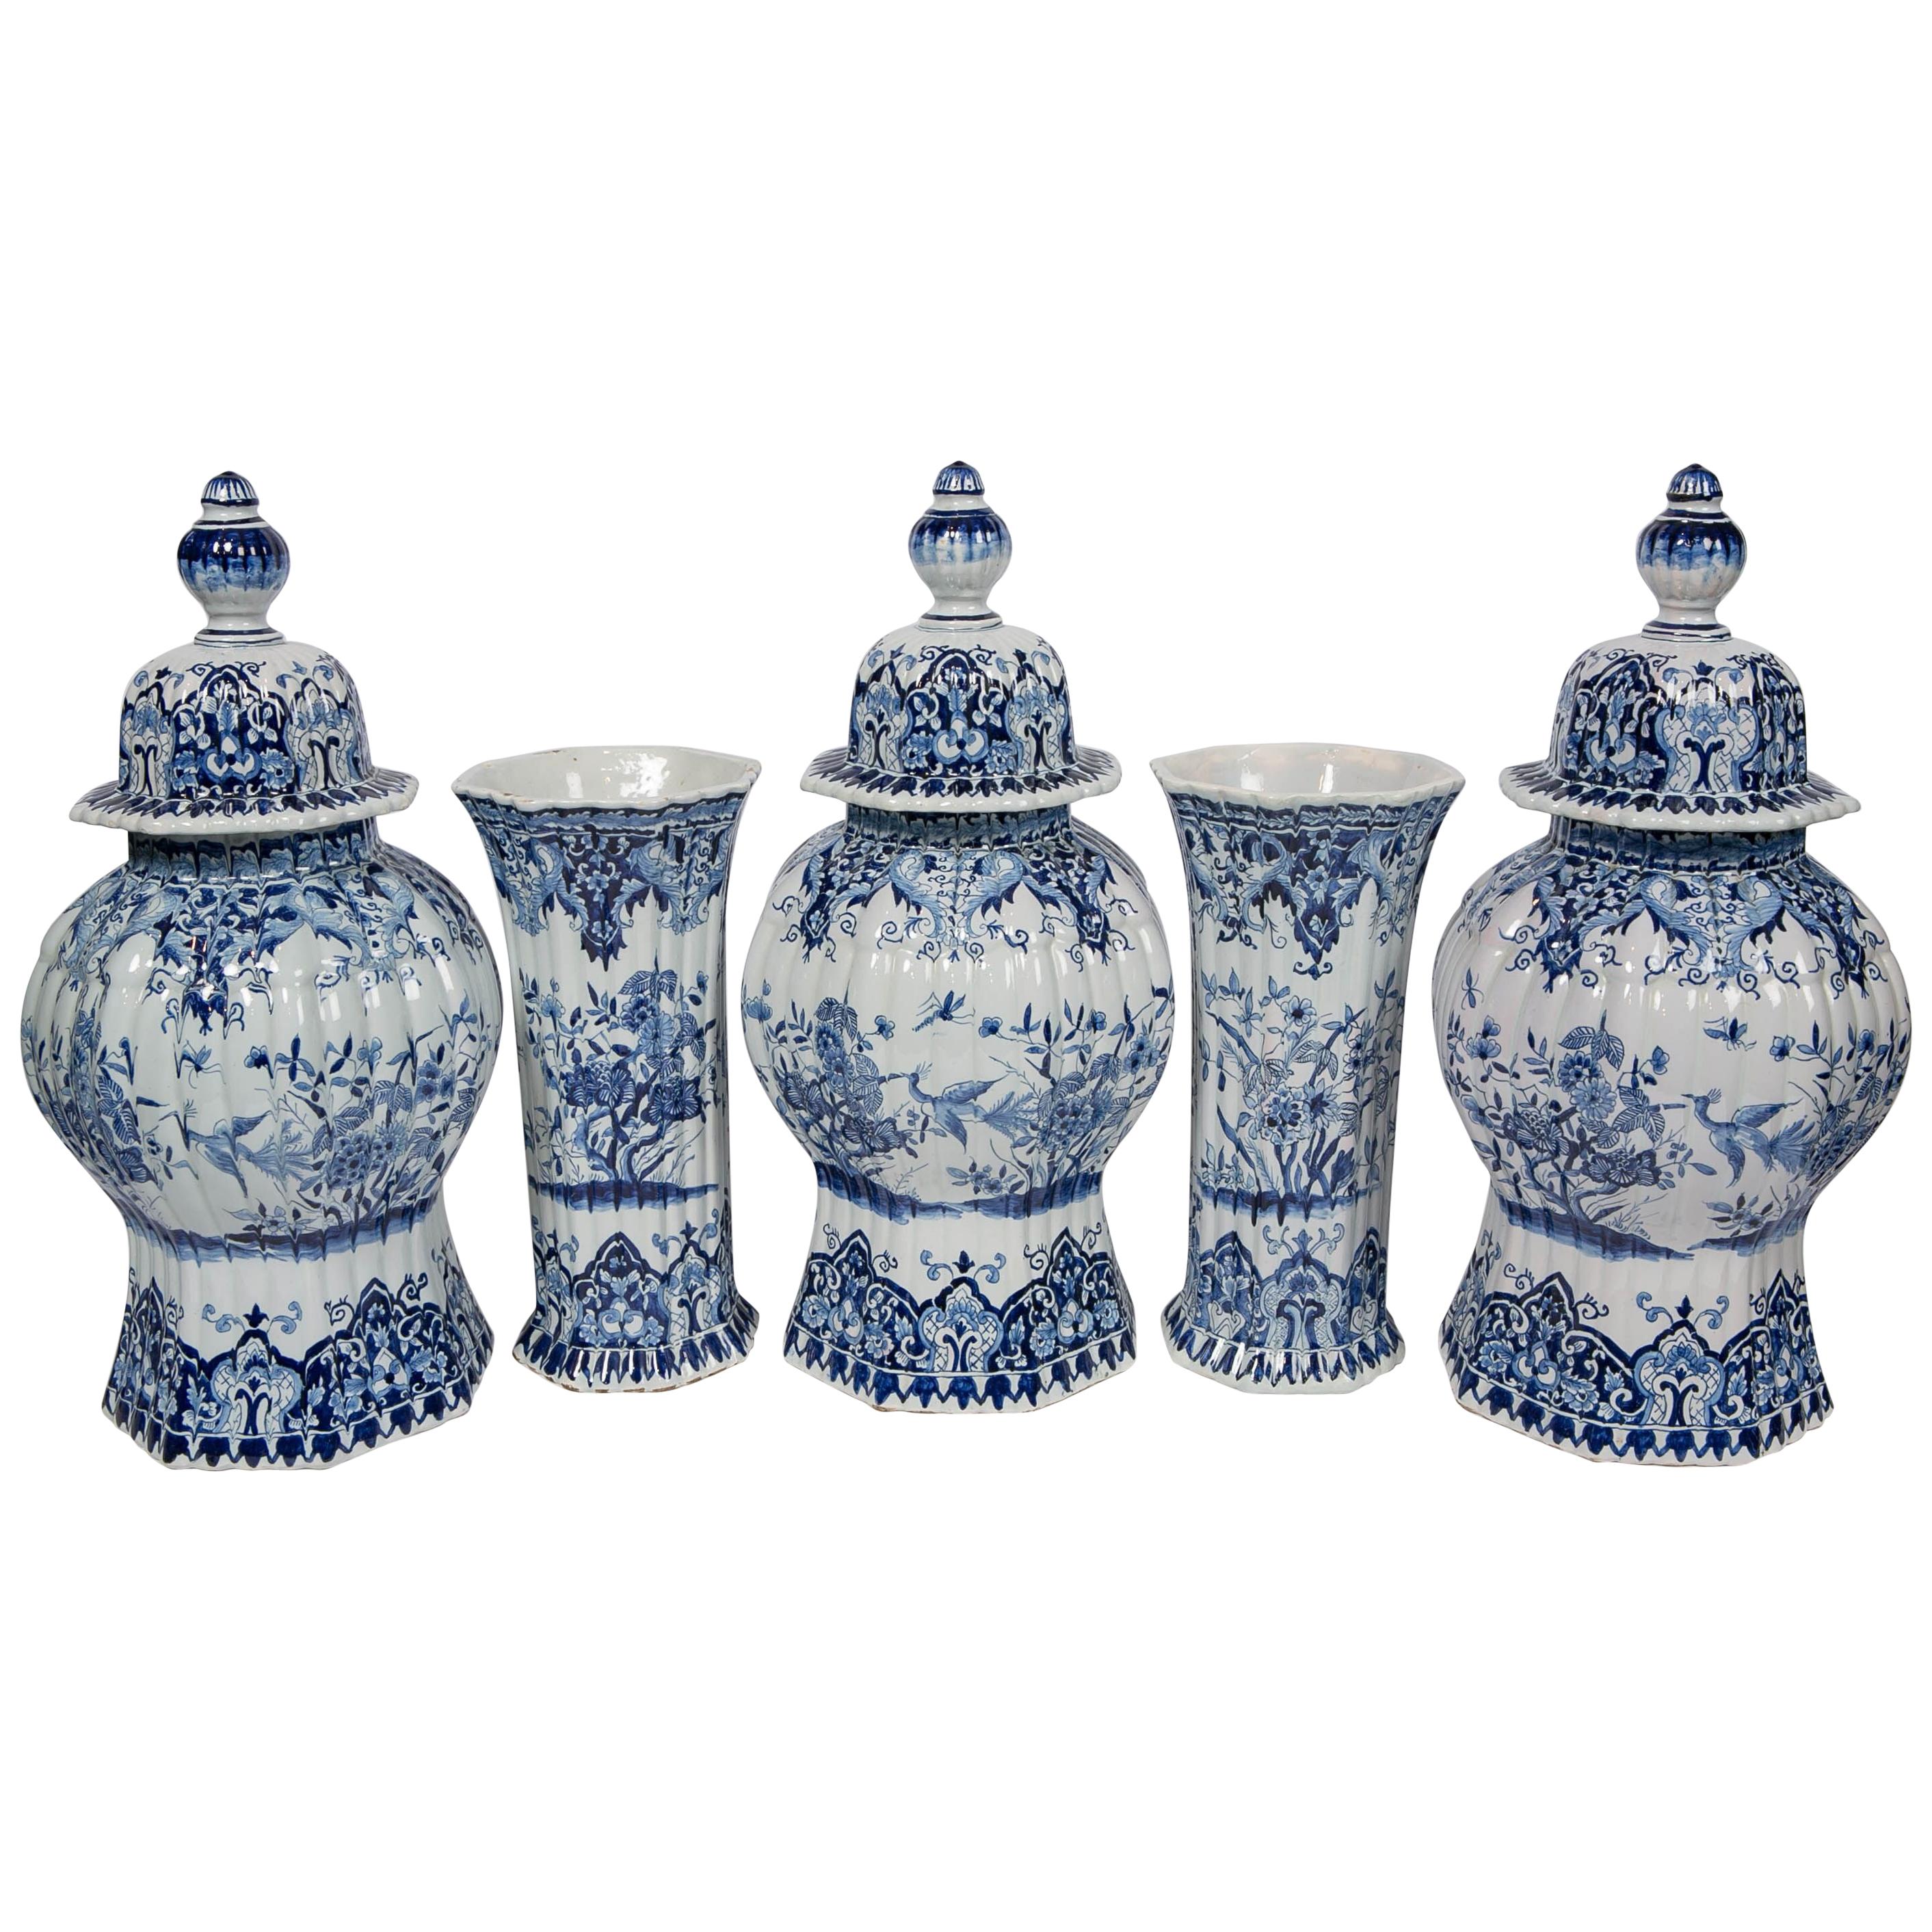 Blue and White Five Piece Garniture Delft Style Made 20th Century